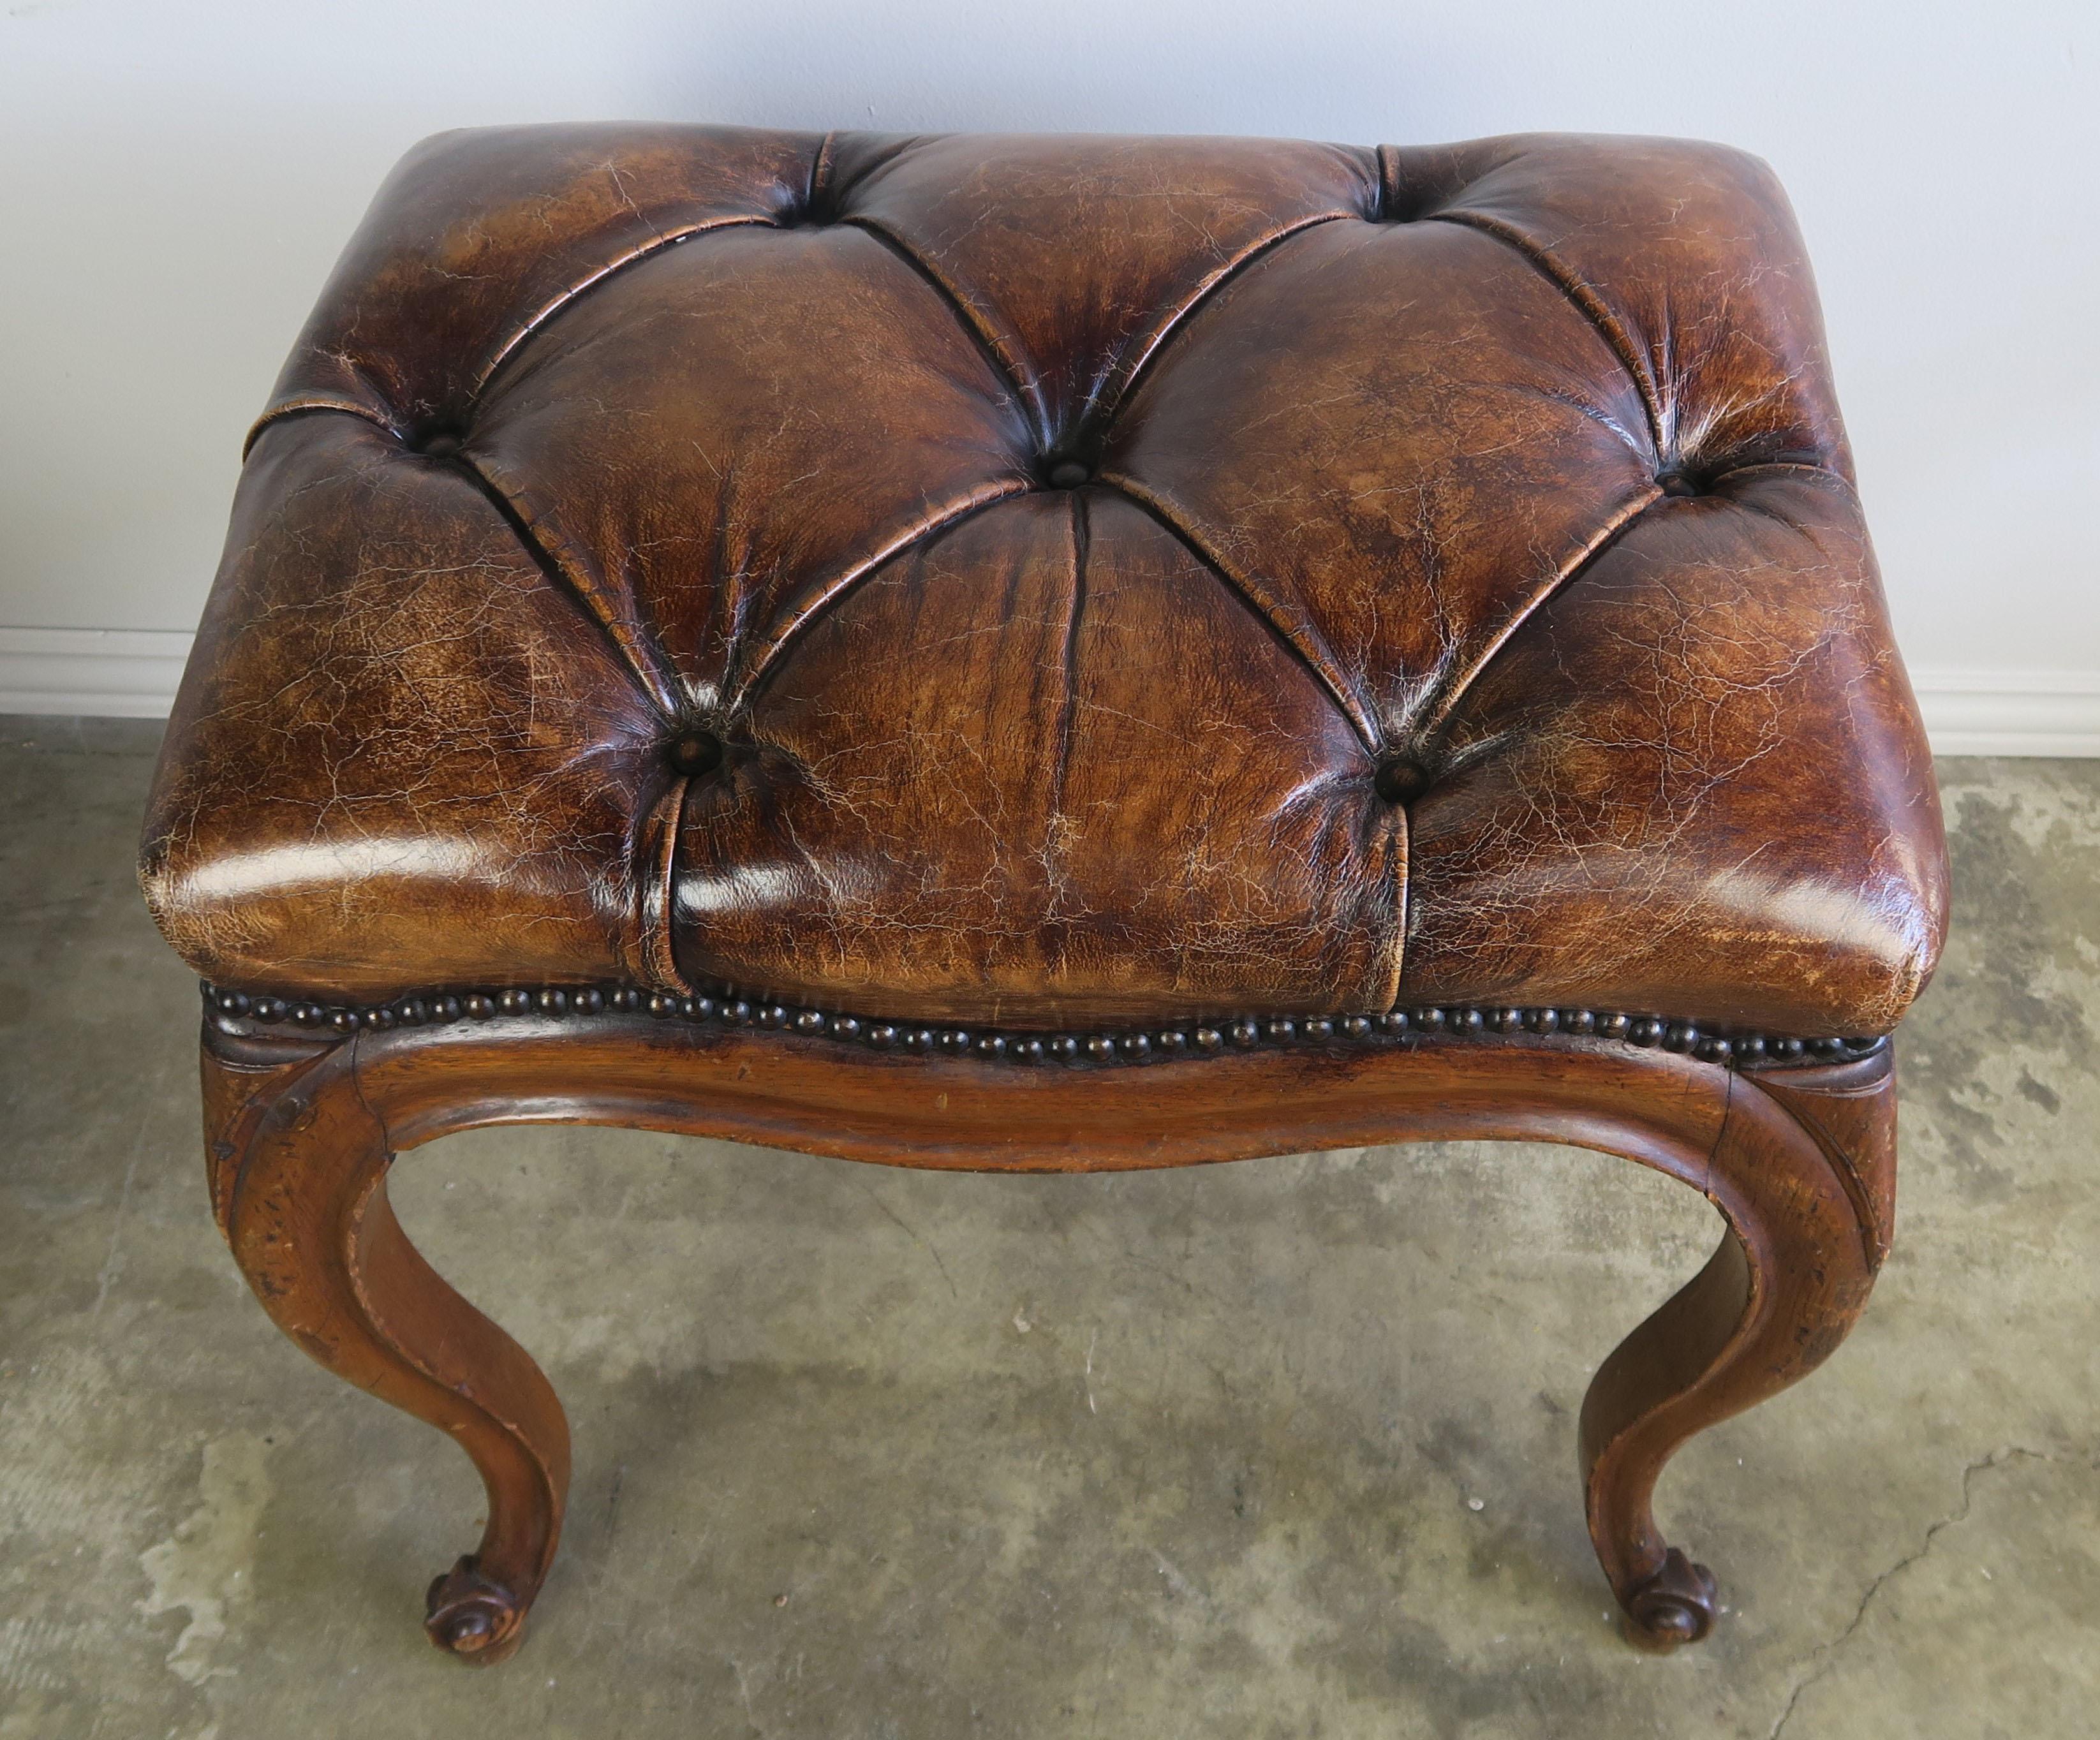 French Louis XV style leather tufted bench with nailhead trim detail. The walnut bench stands on four cabriole legs that end in ram's head feet. Beautiful worn leather in great condition.